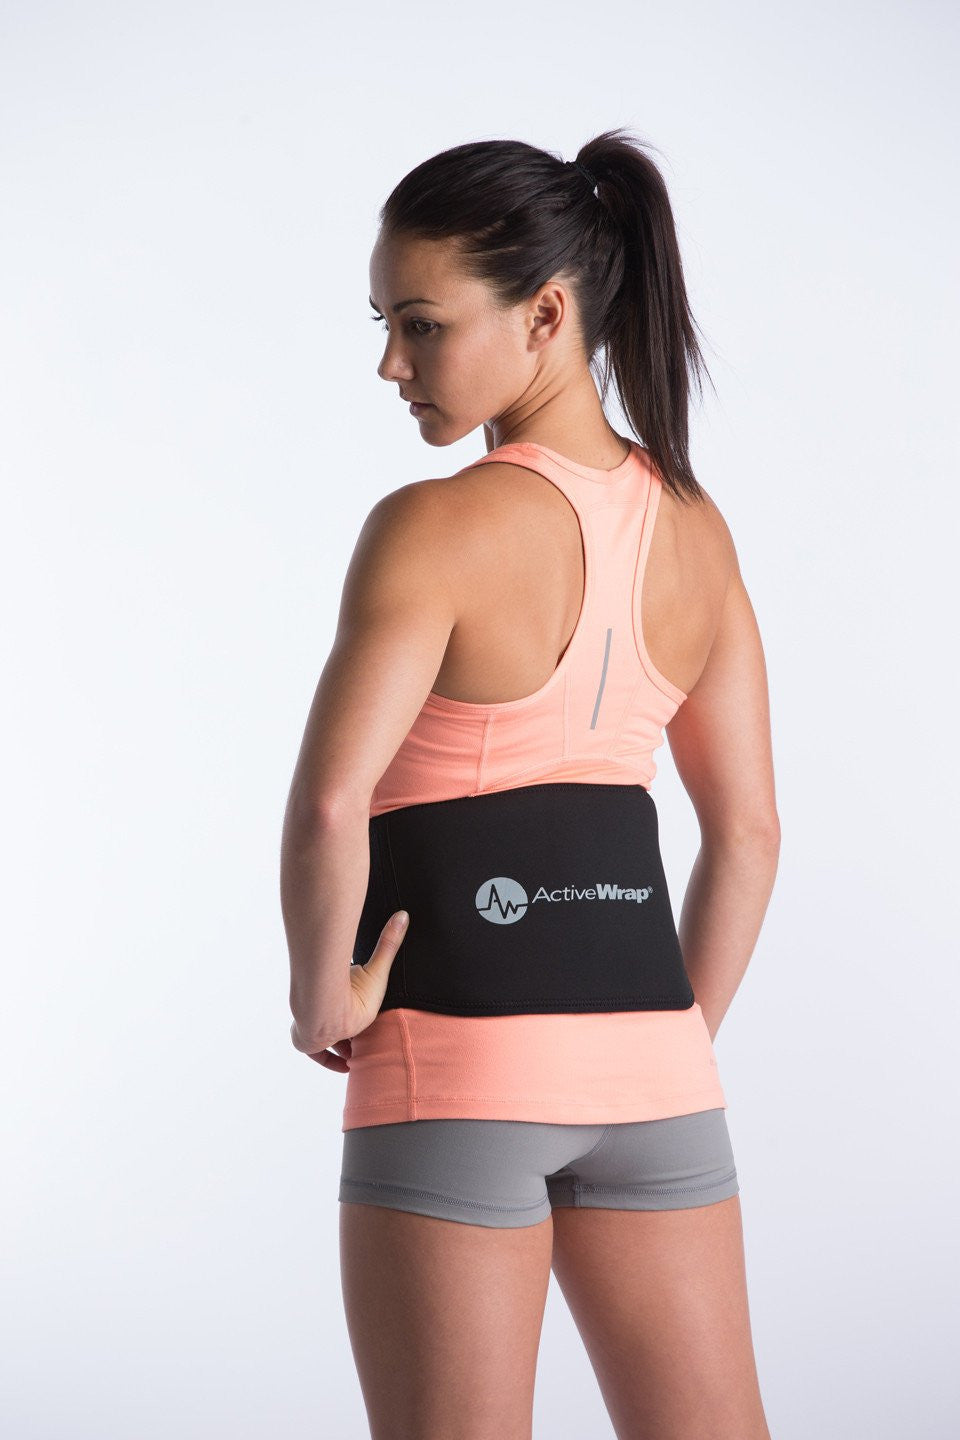 Women's Back Support  Experience Pain Relief Today